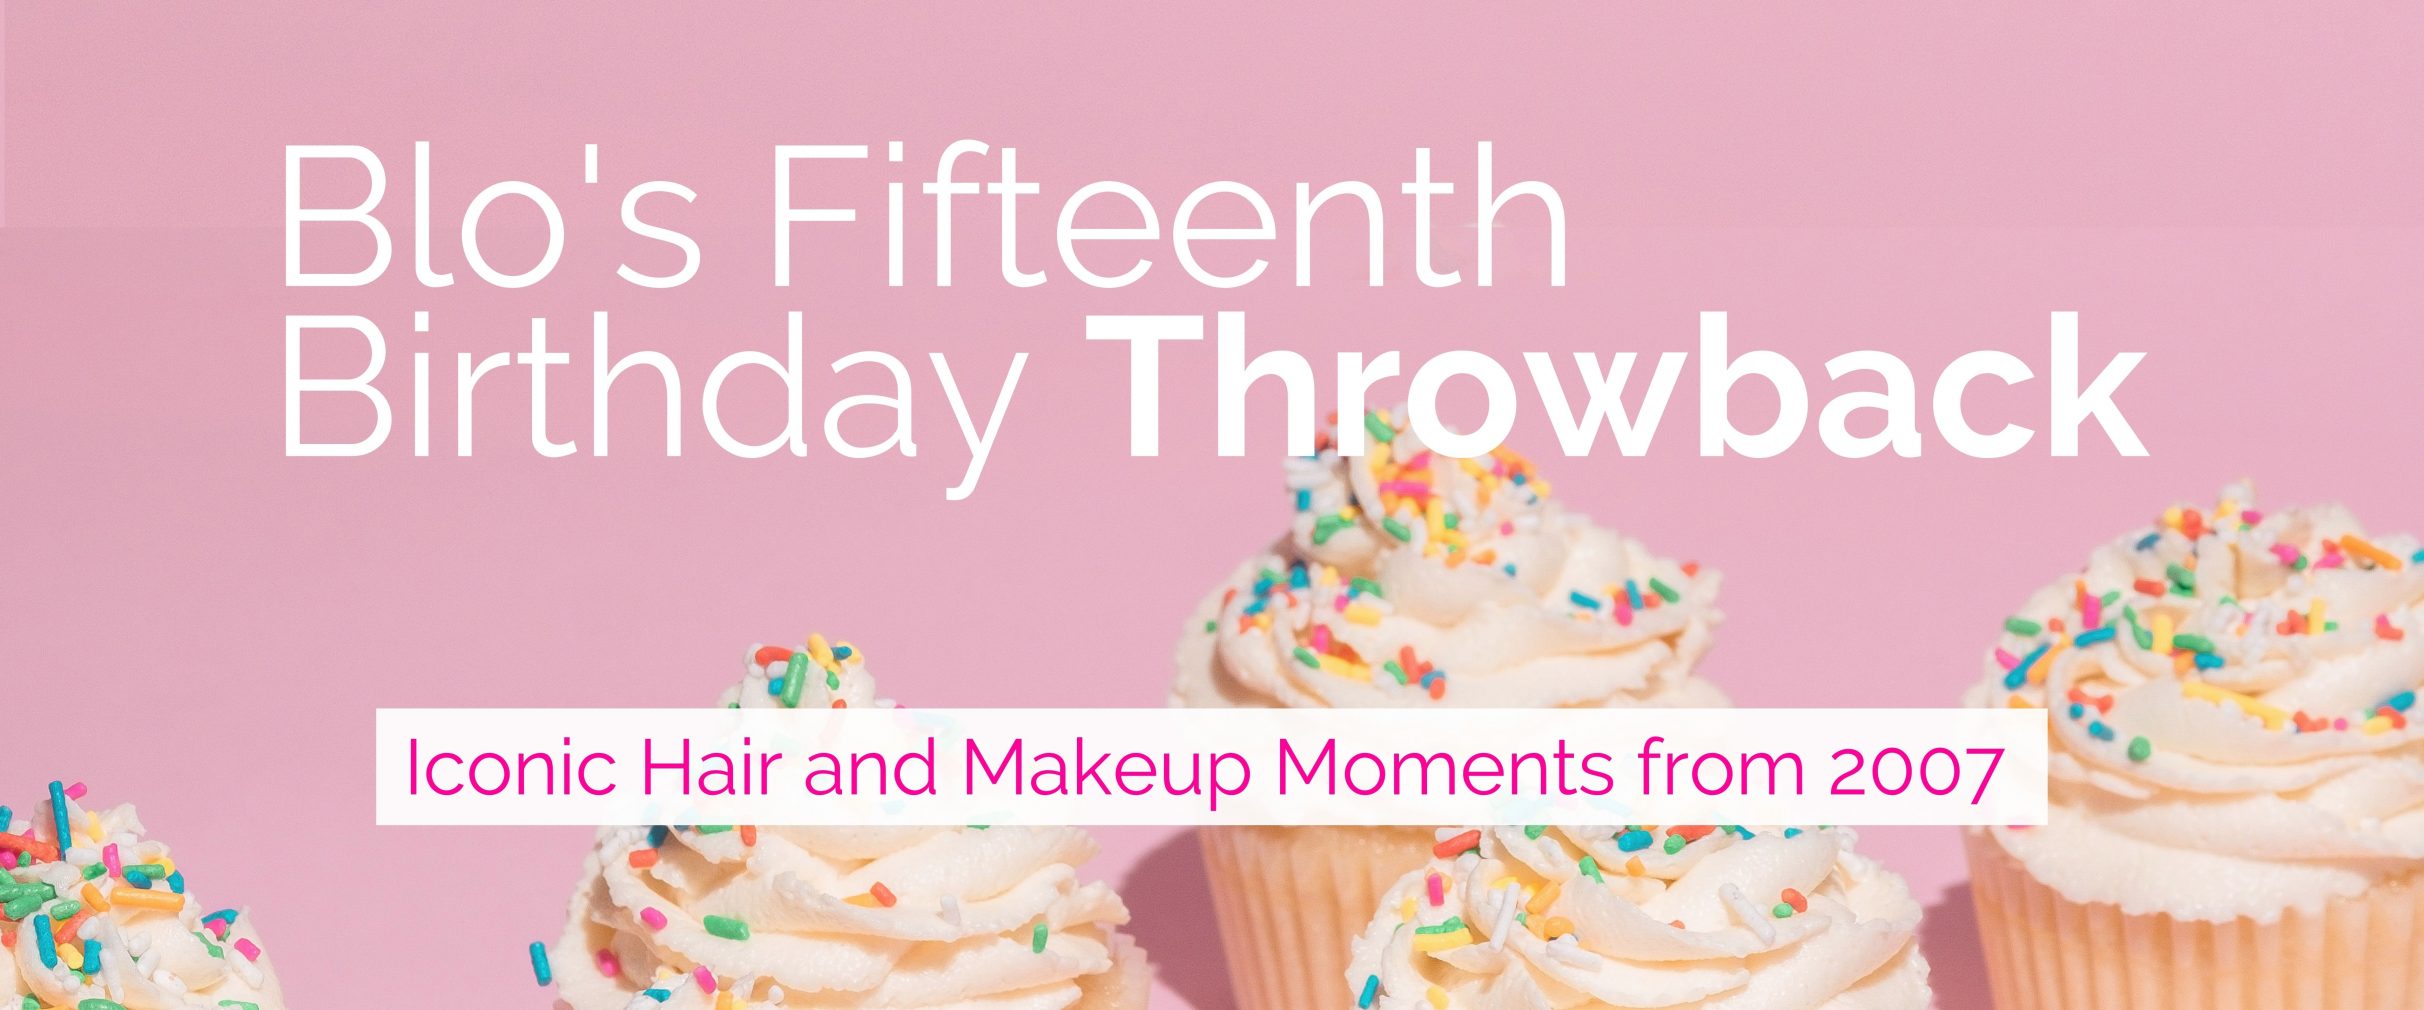 Blo's Fifteenth Birthday Throwback – Iconic Hair & Makeup Moments From 2007  | Blo Blow Dry Bar